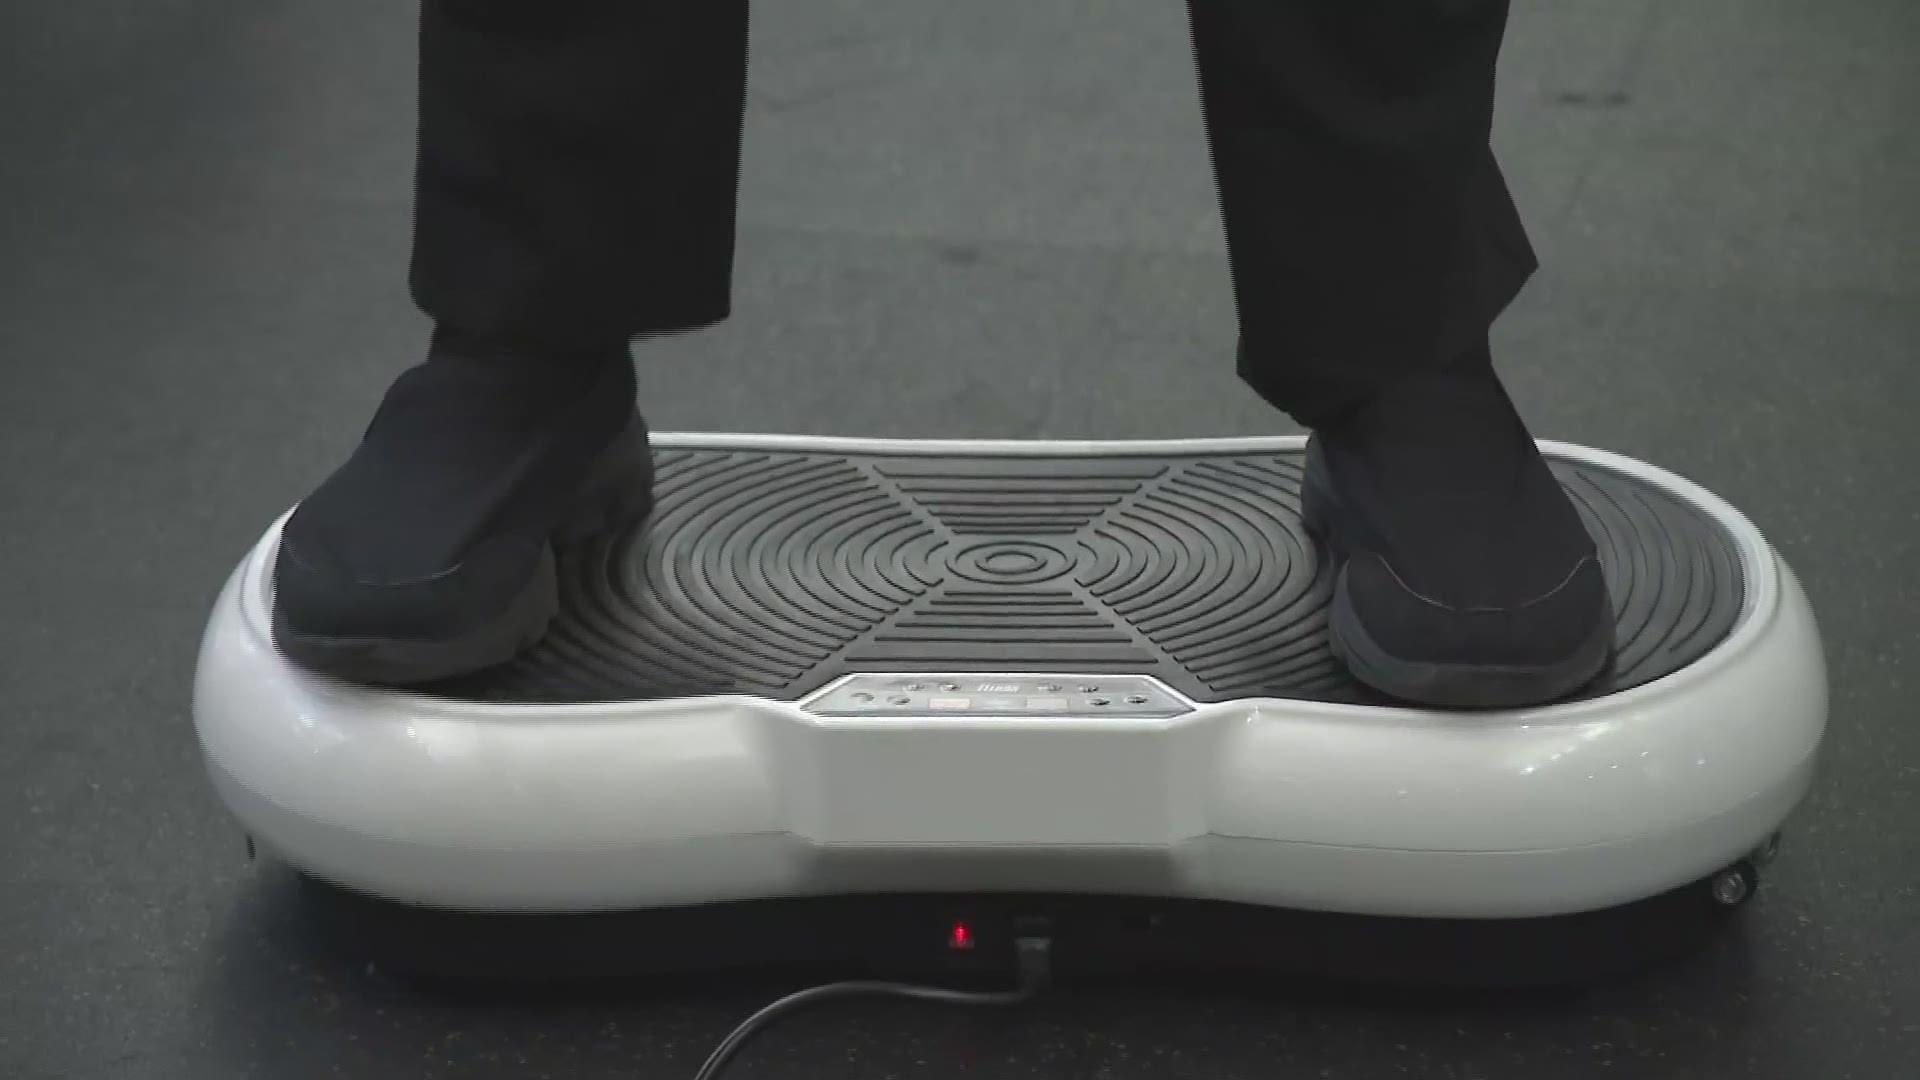 Jan. 17, 2020: Looking to lose some weight this year? We tested out the Hurtle Fitness Vibration Platform, UB Toner and Sports Hoop to see how they work.